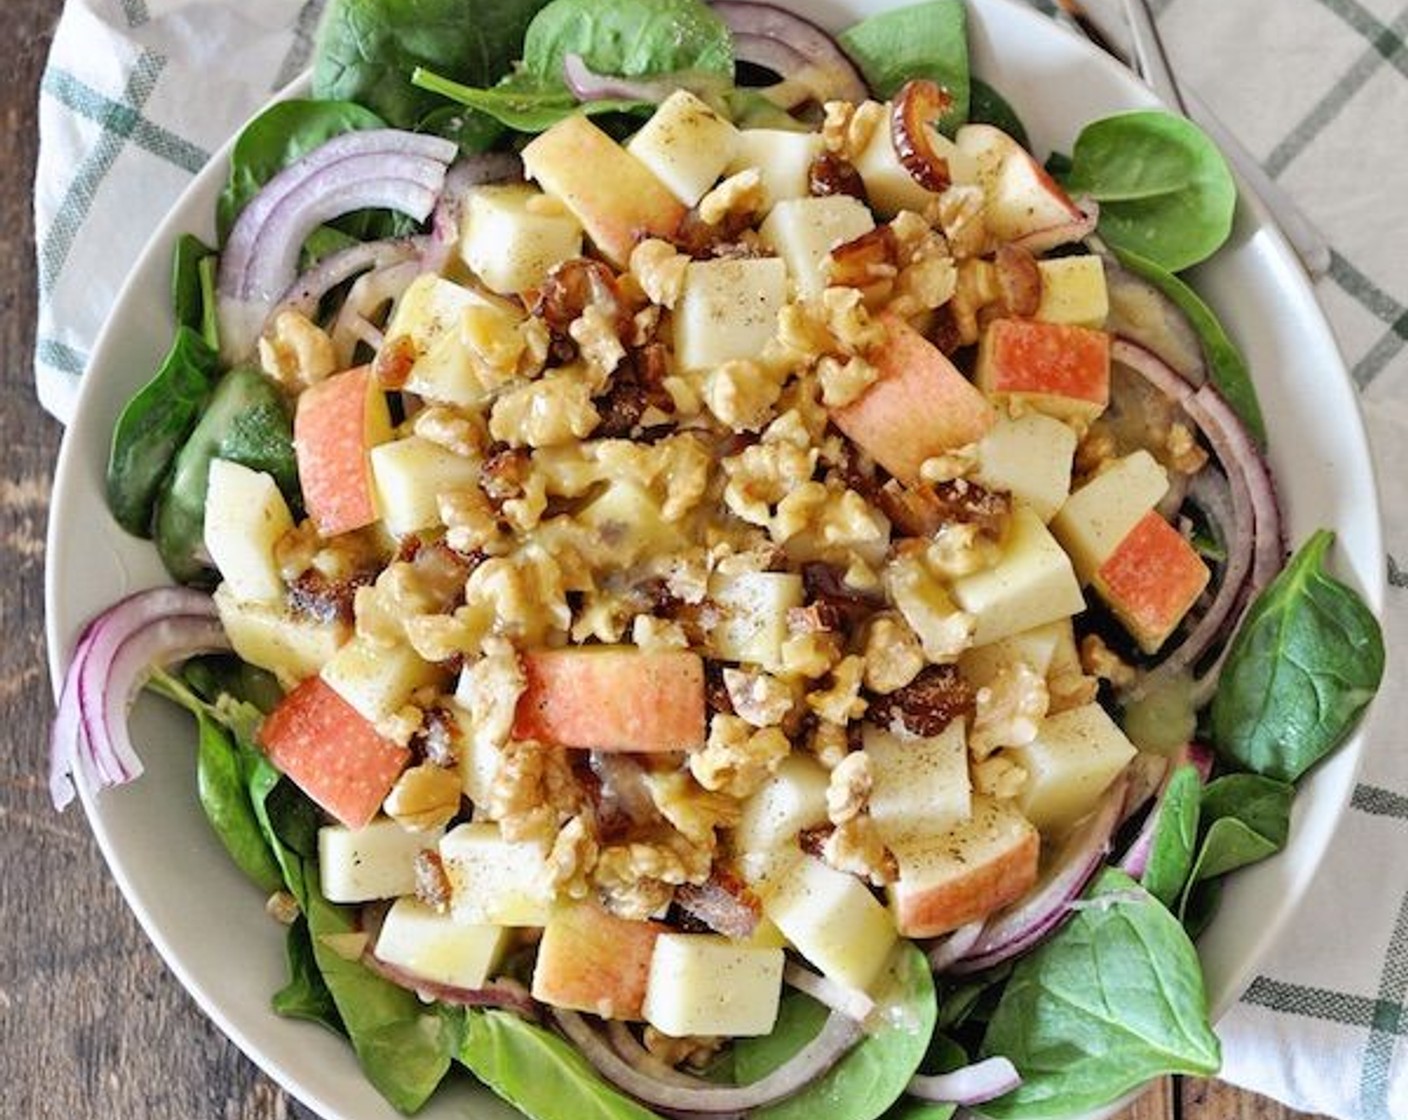 Winter Spinach Salad with Apples and Manchego Cheese